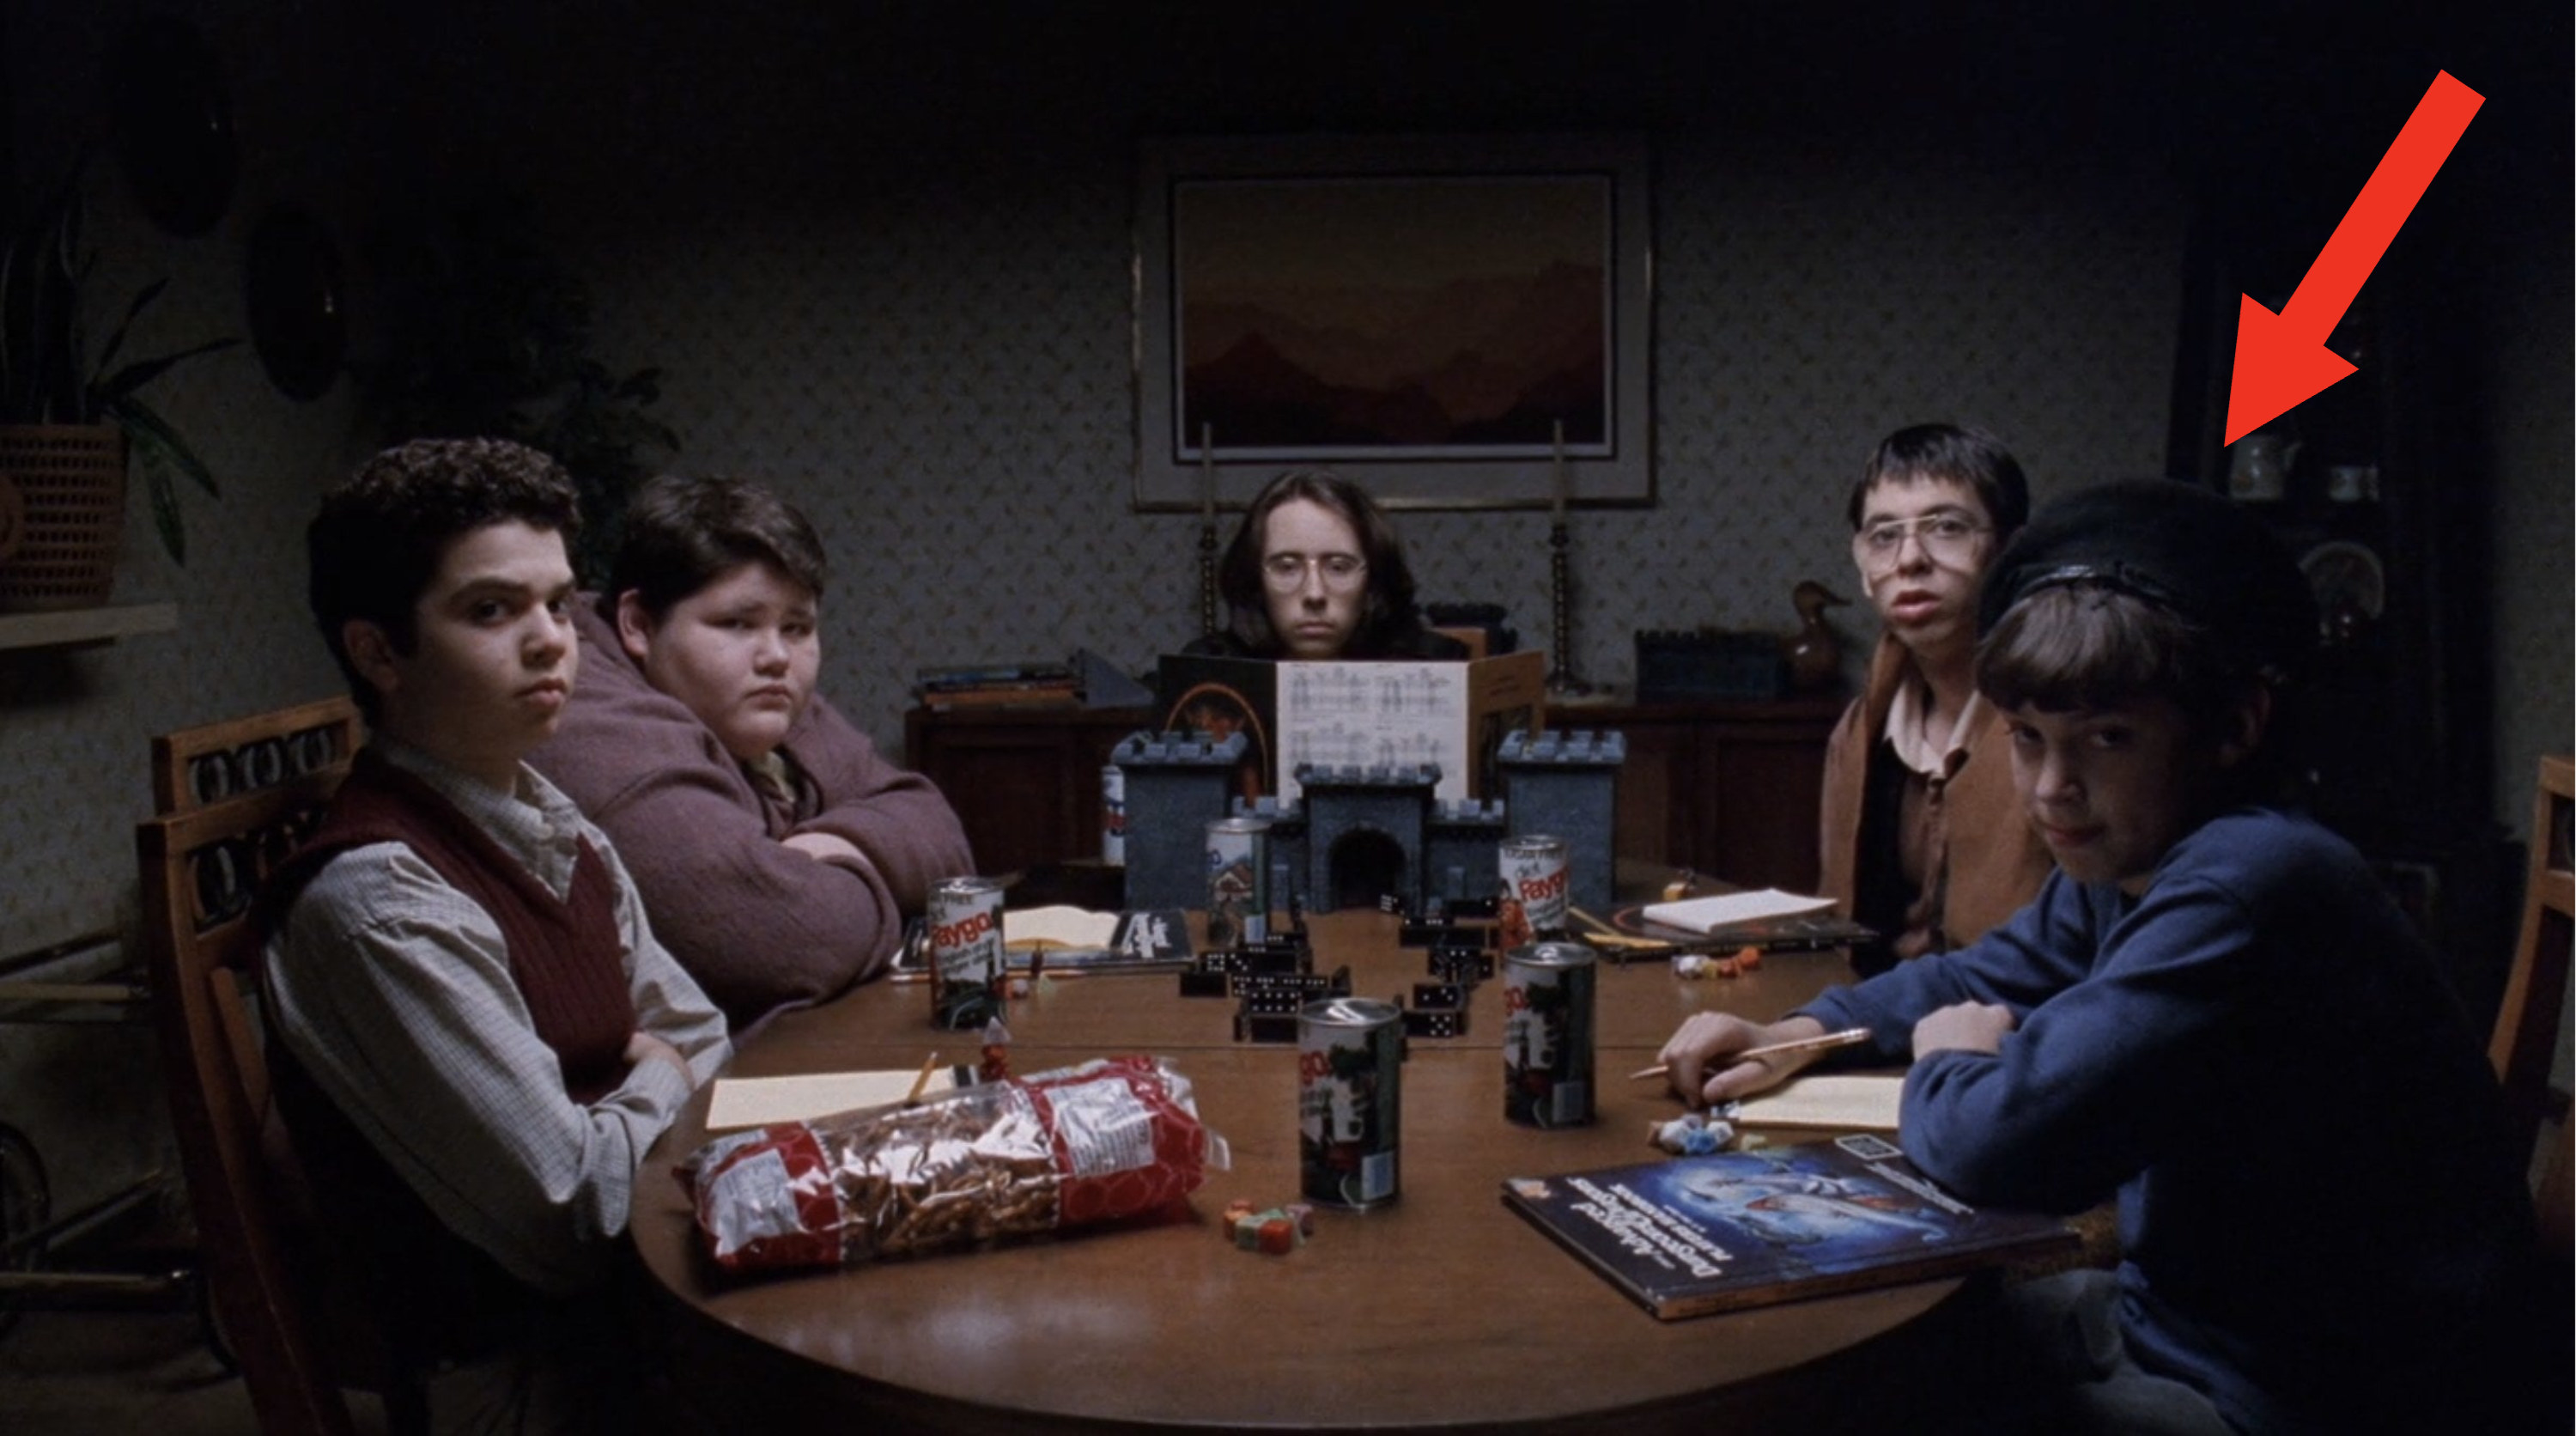 the geeks playing dungeons and dragons in freaks and geeks